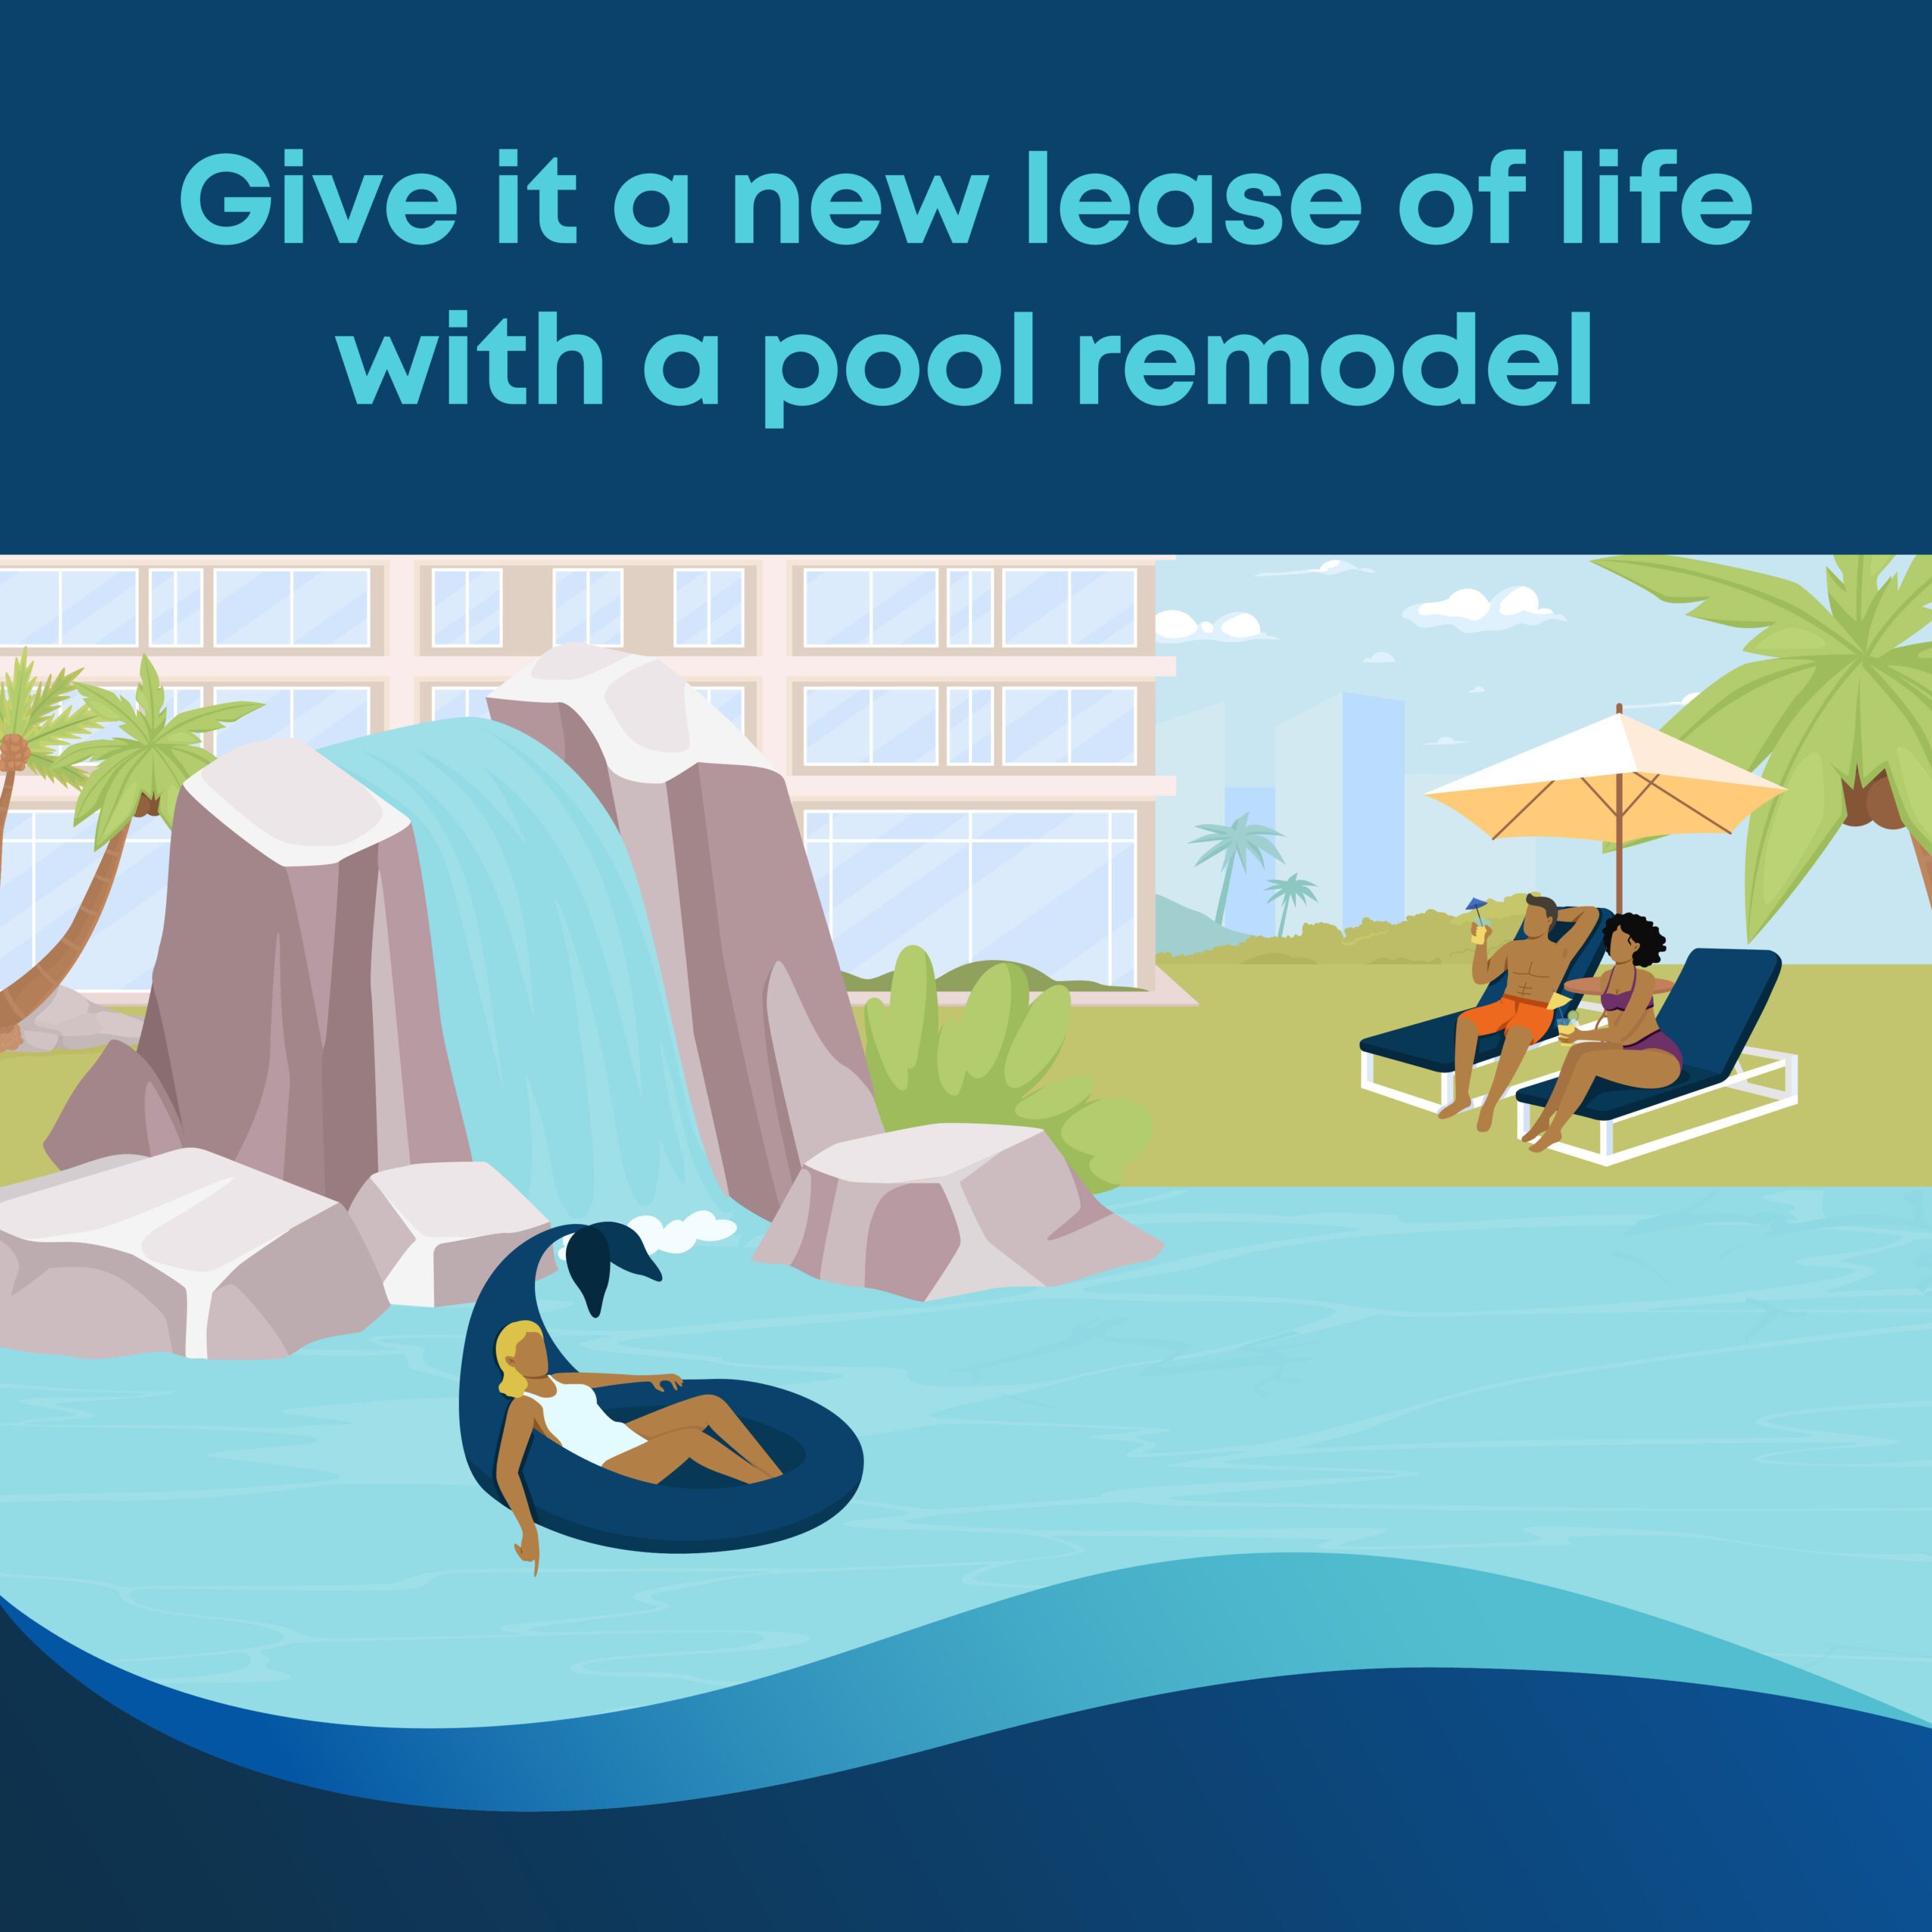 Fall in love with your pool - remodel